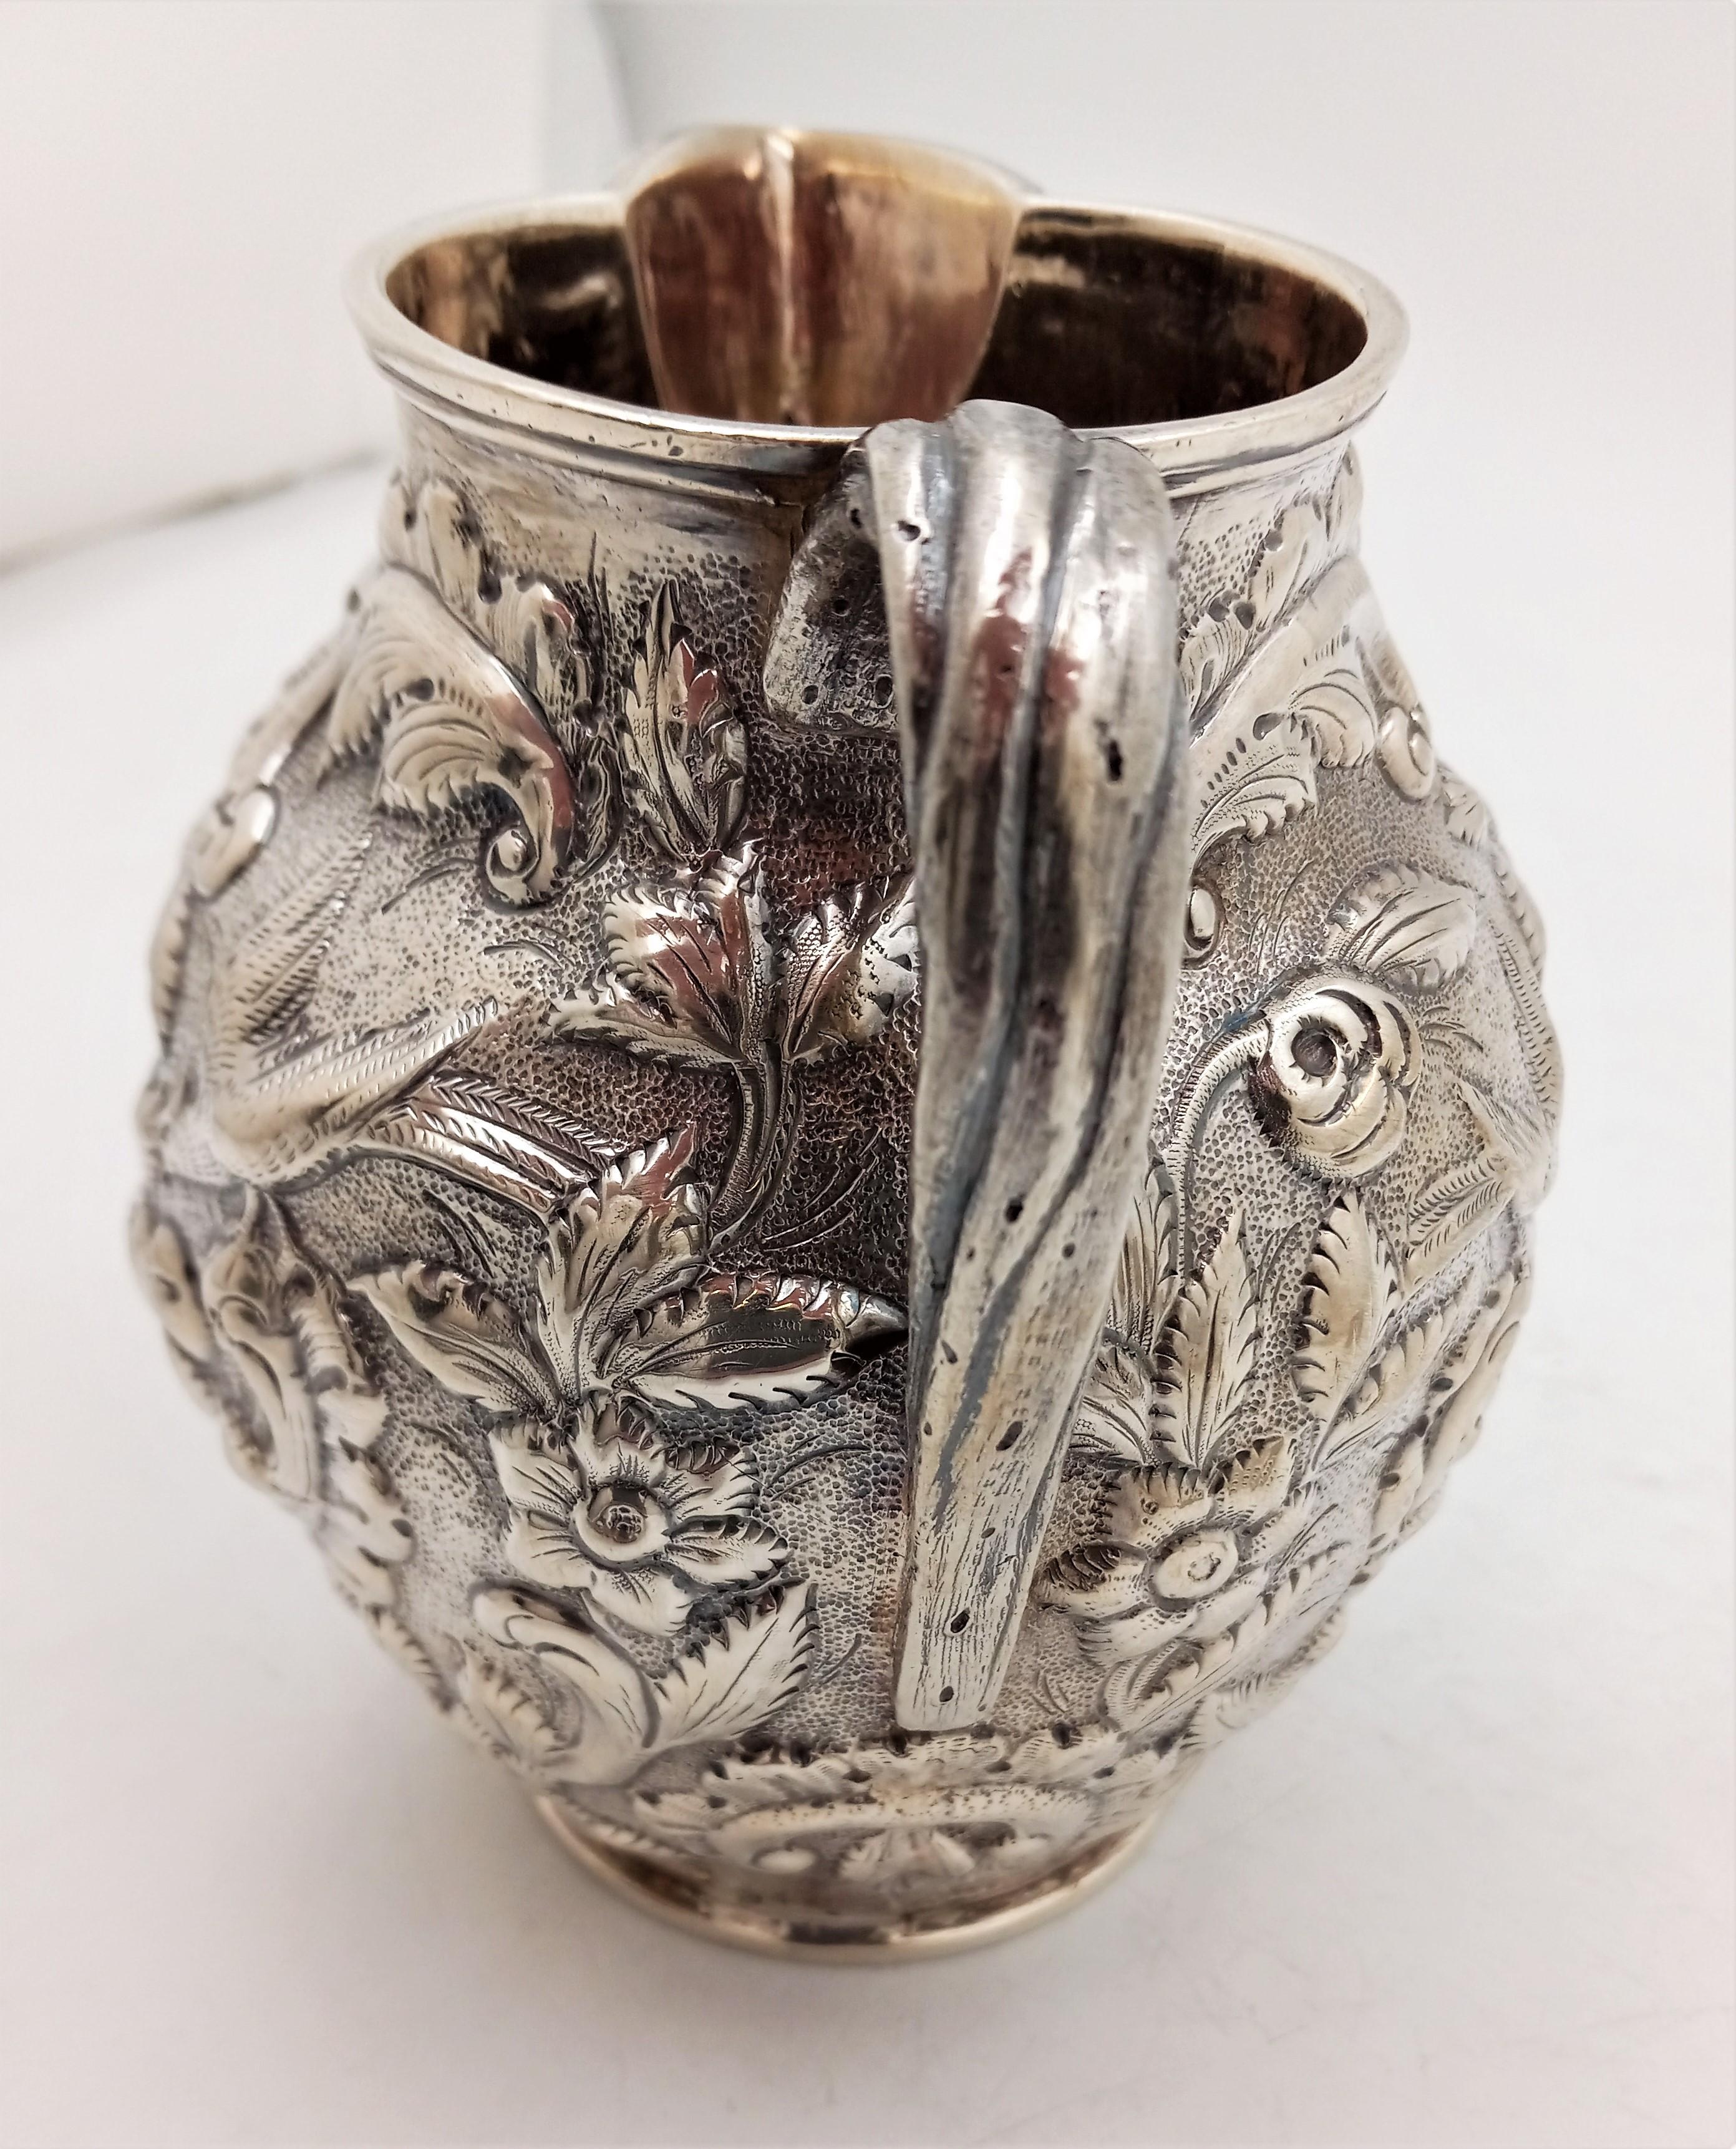 American Geo. W. Webb & Co. Hand-Chased Coin Silver Aesthetic Repousse Pitcher, c. 1875